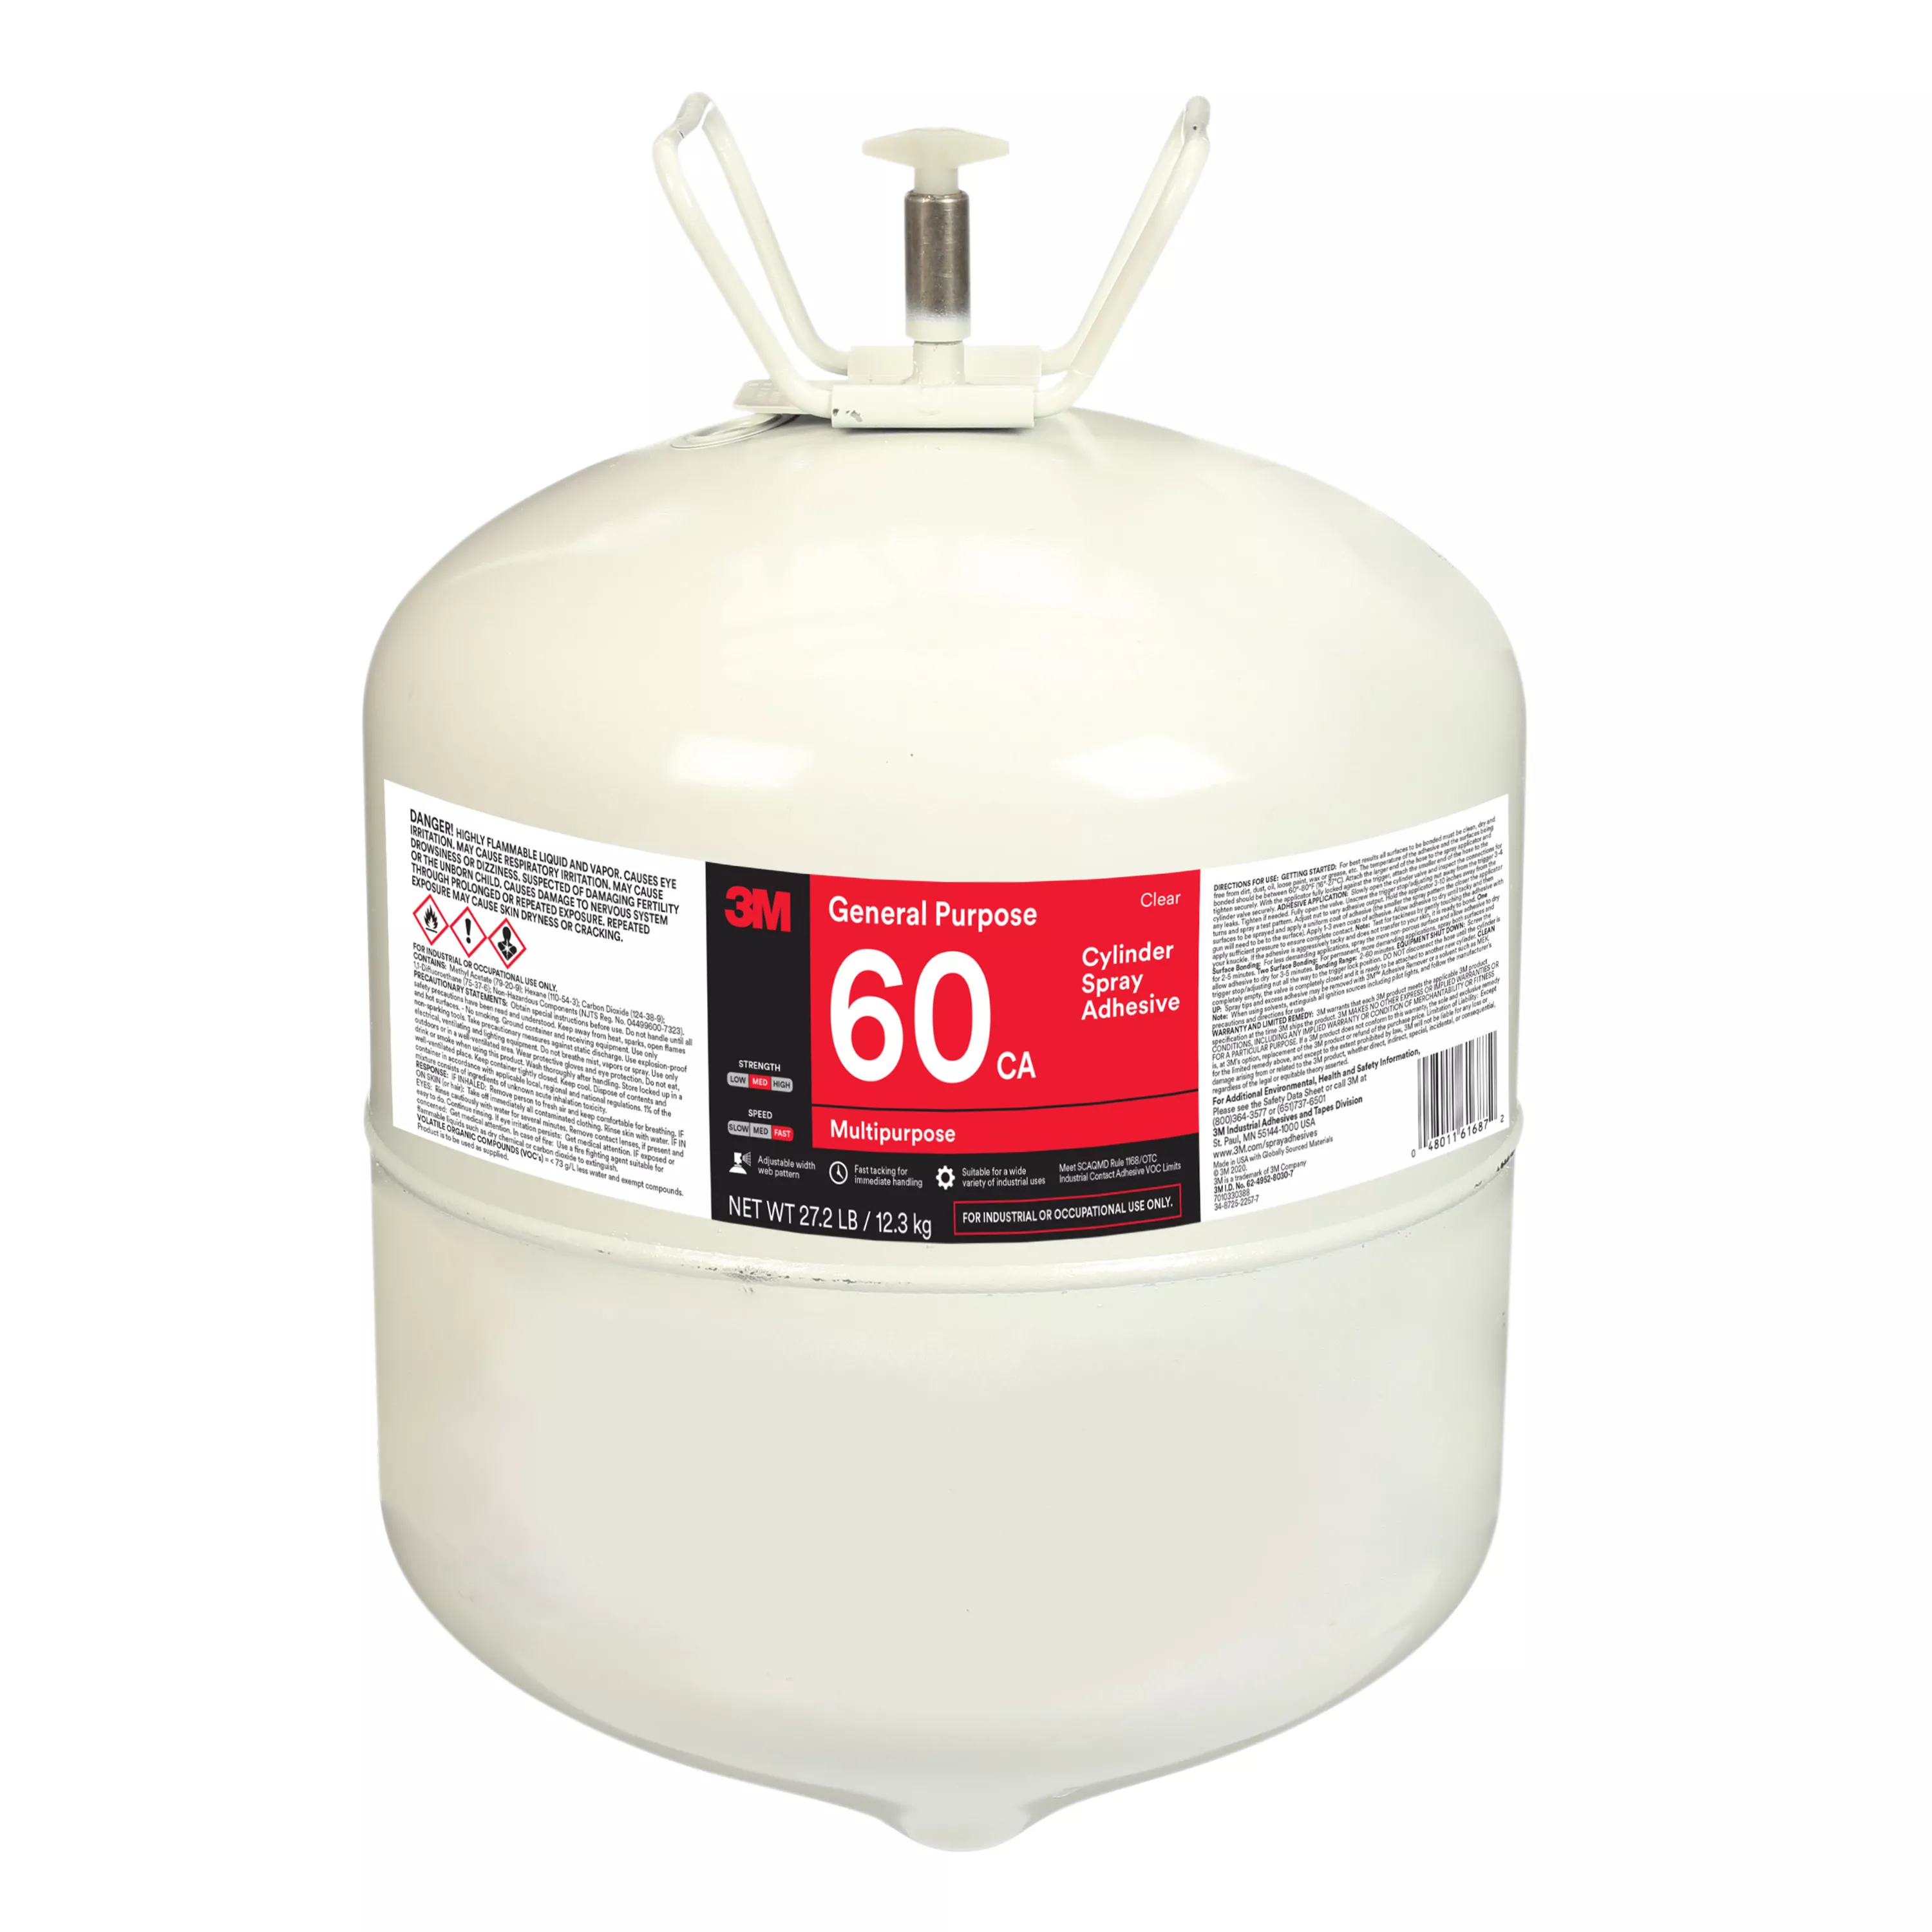 3M™ General Purpose 60 CA Cylinder Spray Adhesive Low VOC, Clear, Large
Cylinder (Net Wt 27.2 lb), 1 Cylinder/Case